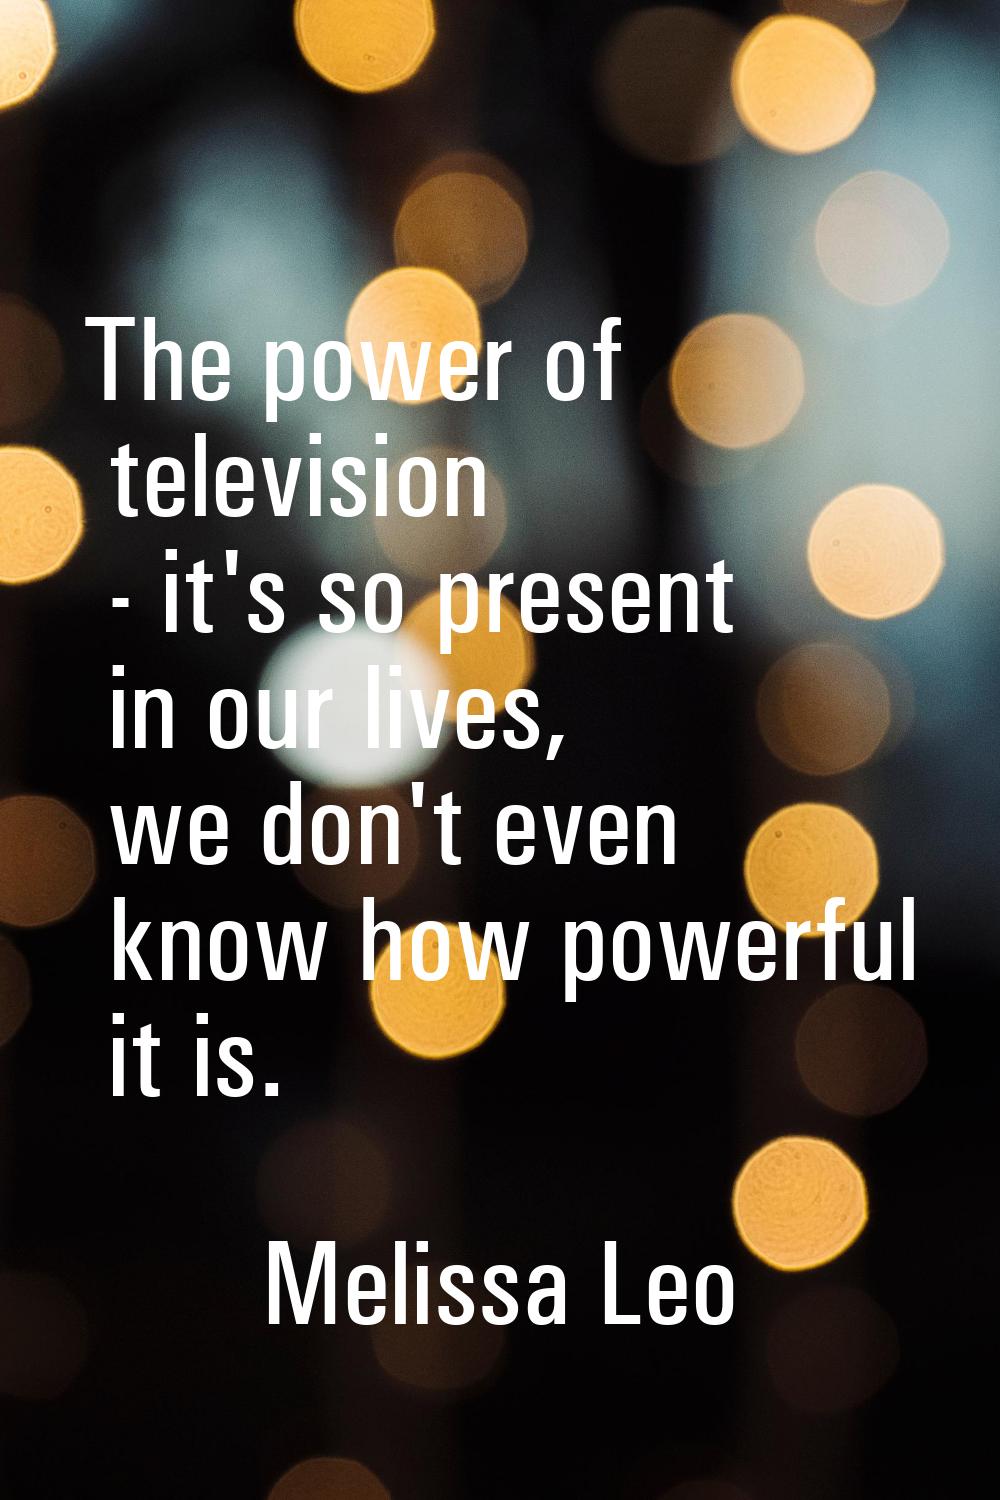 The power of television - it's so present in our lives, we don't even know how powerful it is.